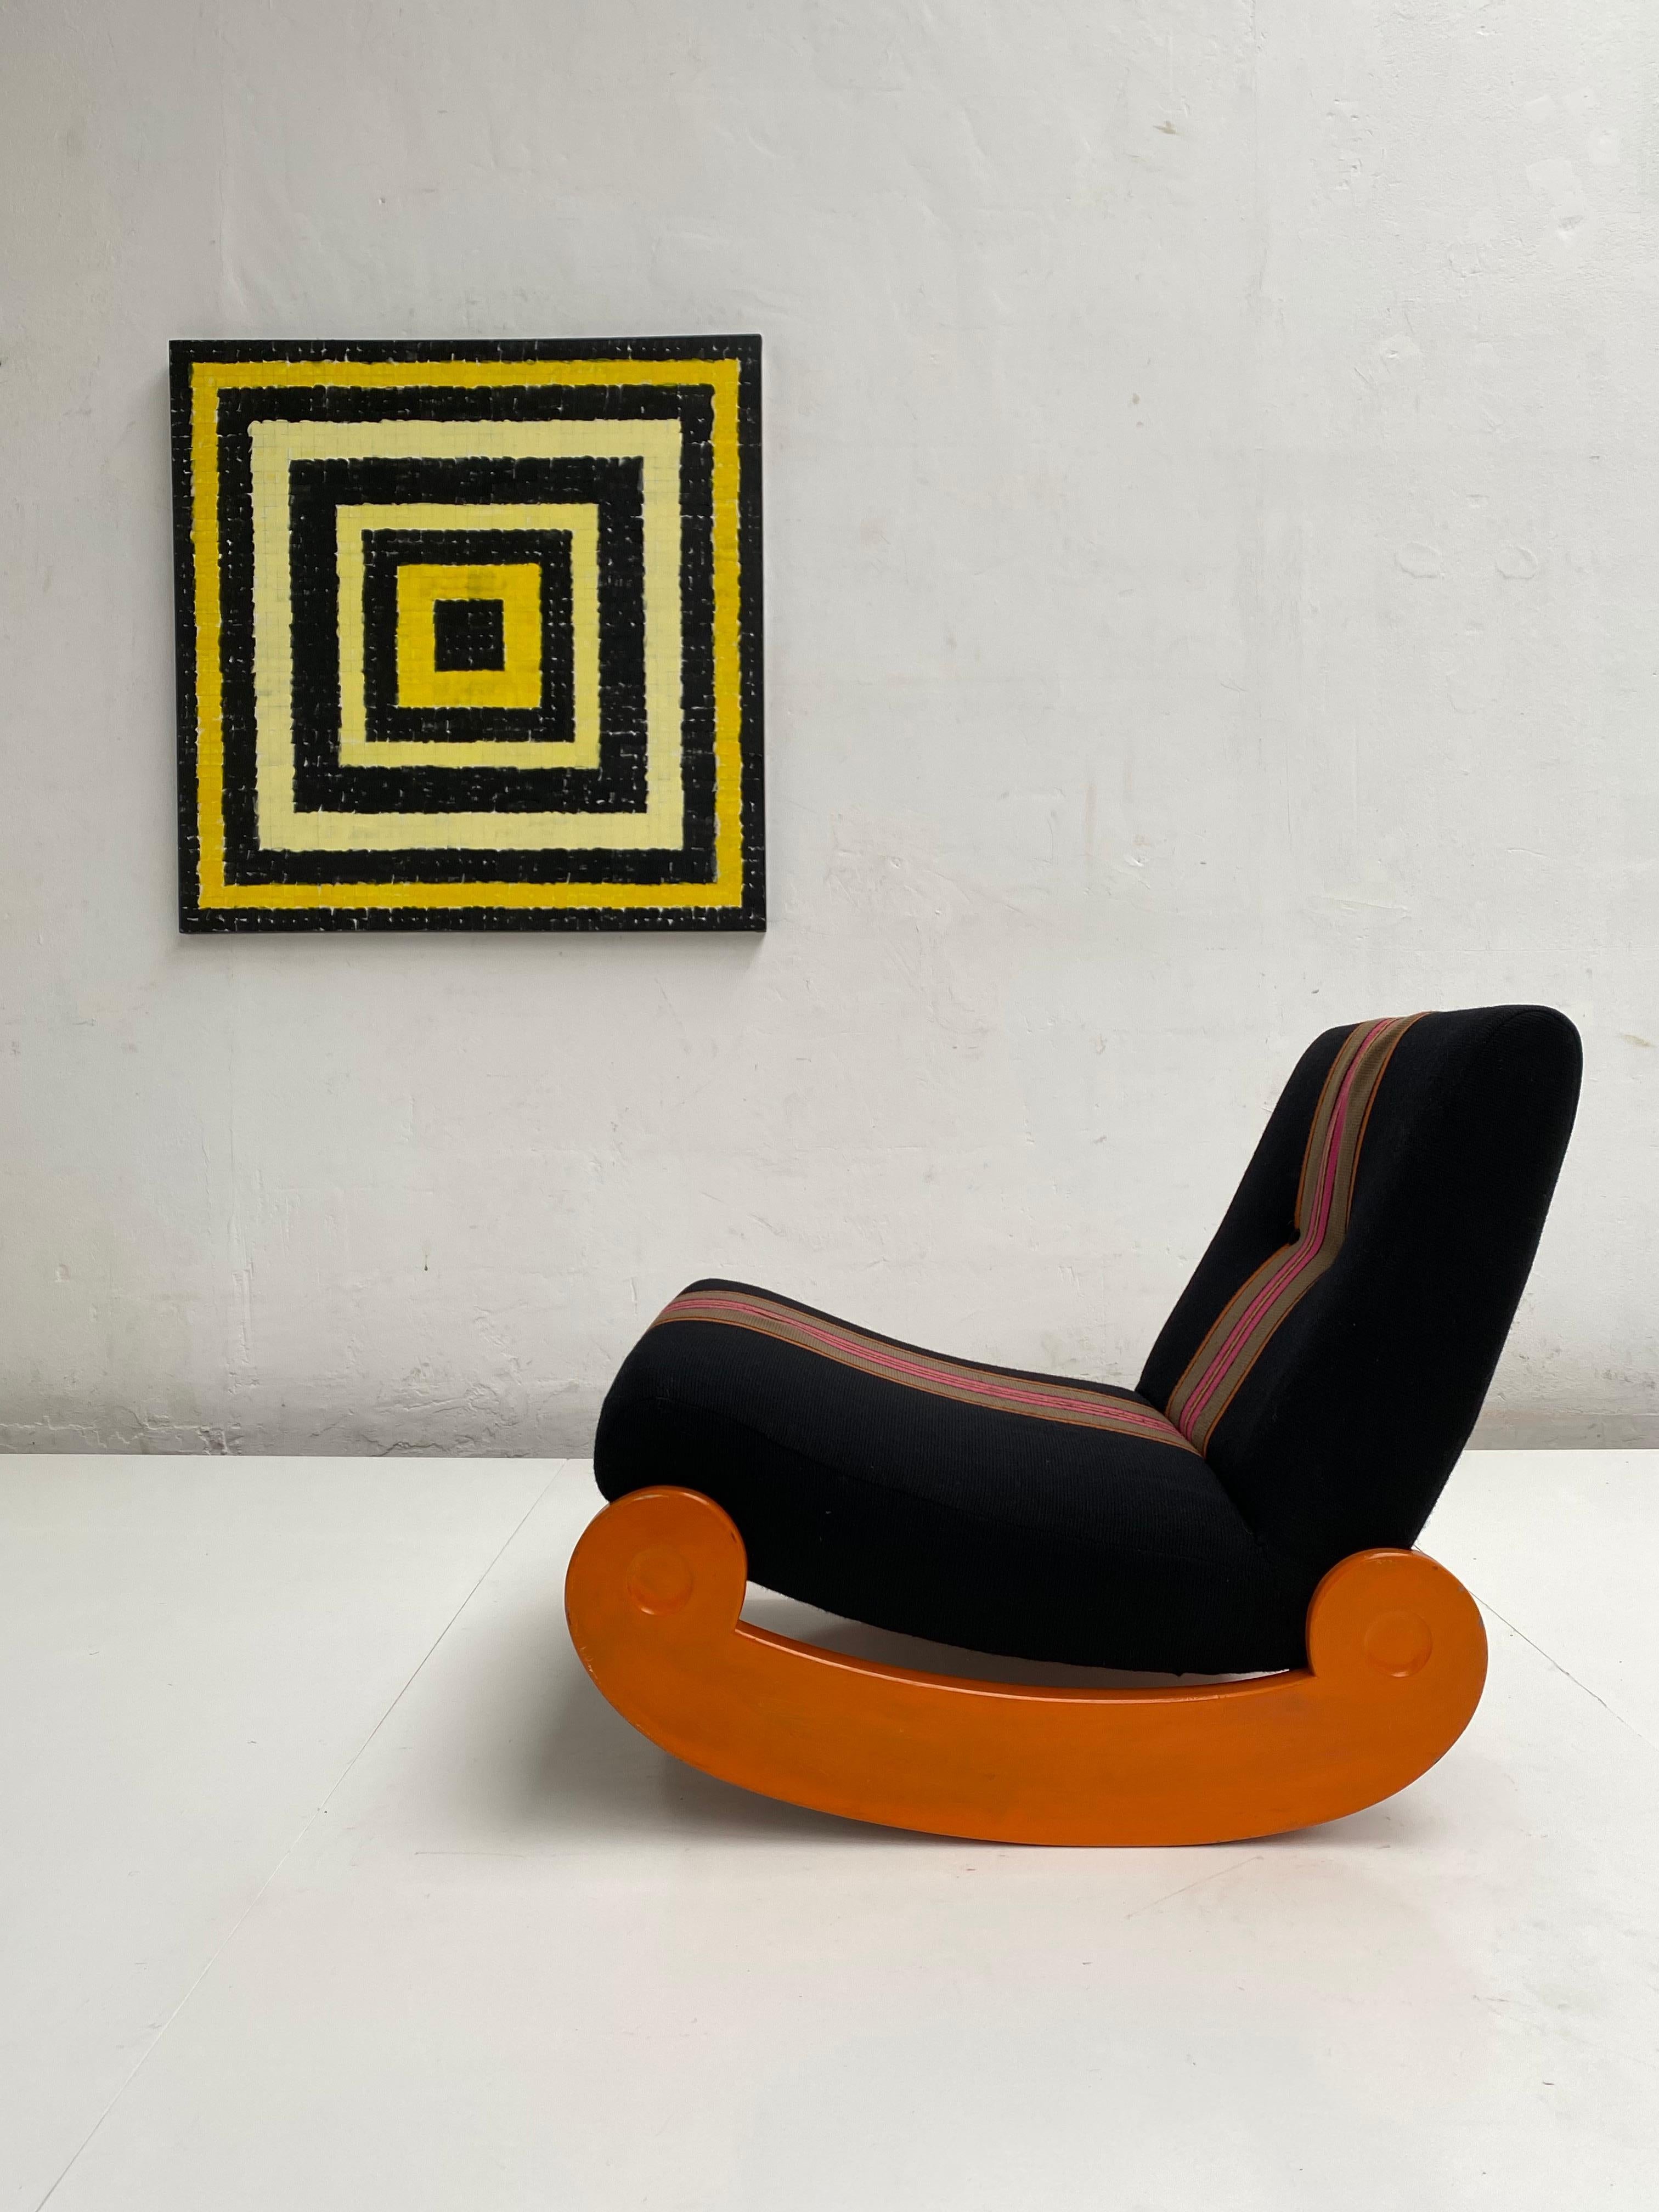 This 1970 rocking chair has its original first owner custom ordered funky wool fabric

The chair was purchased circa 1970 and was reupholstered in 1972 with this typical 1970s wool upholstery to match a modular sofa by Klaus Uredat for Cor

We